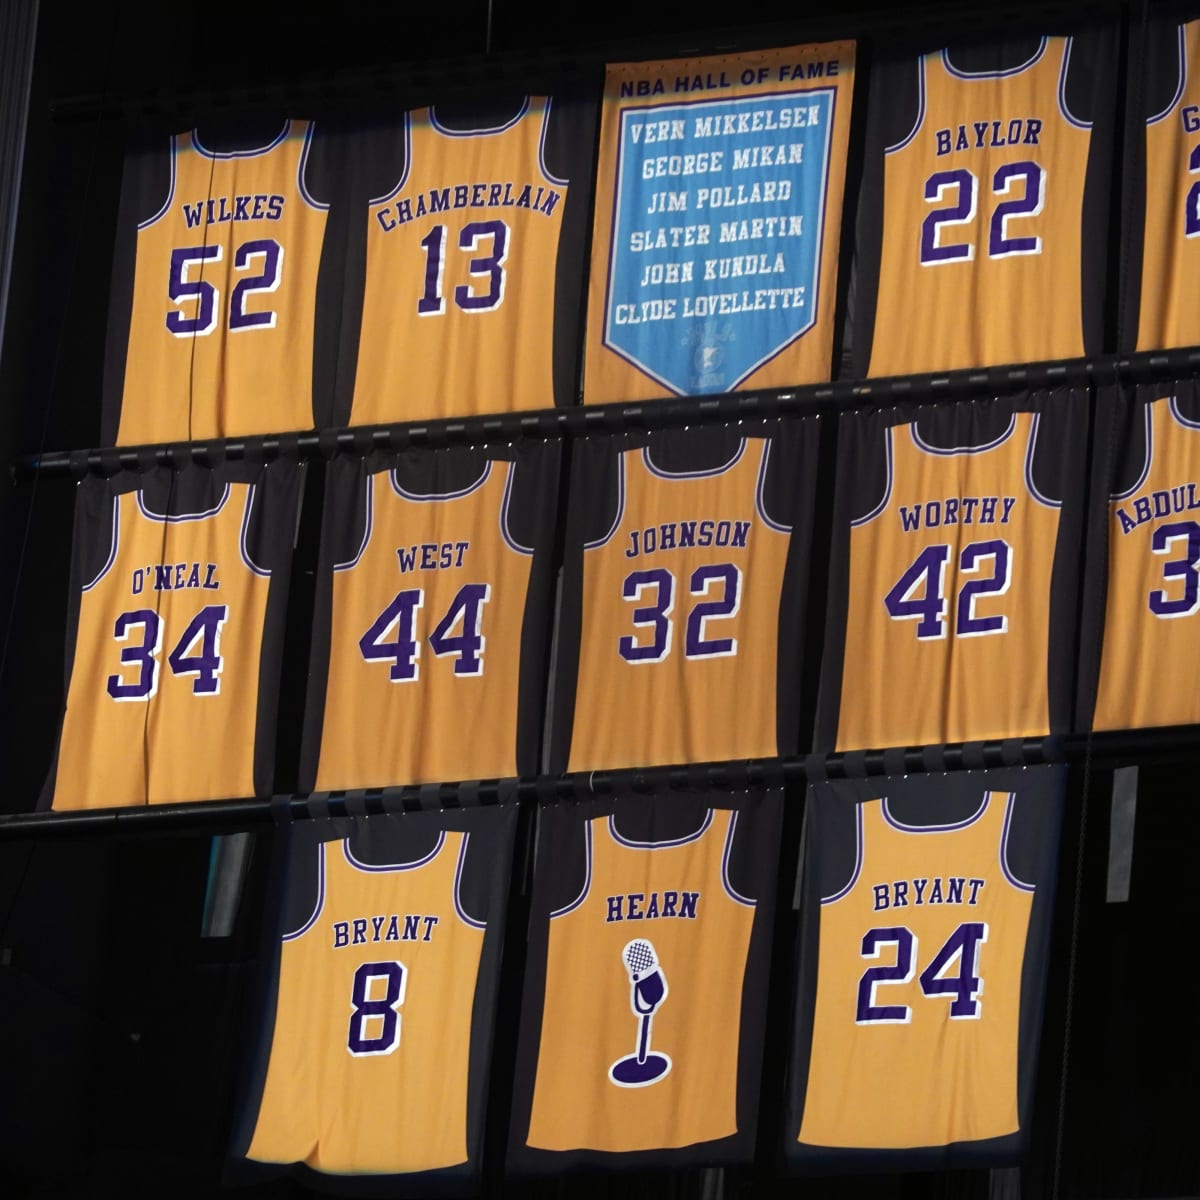 Lakers News: League Pays Tribute To George Mikan With Freshly